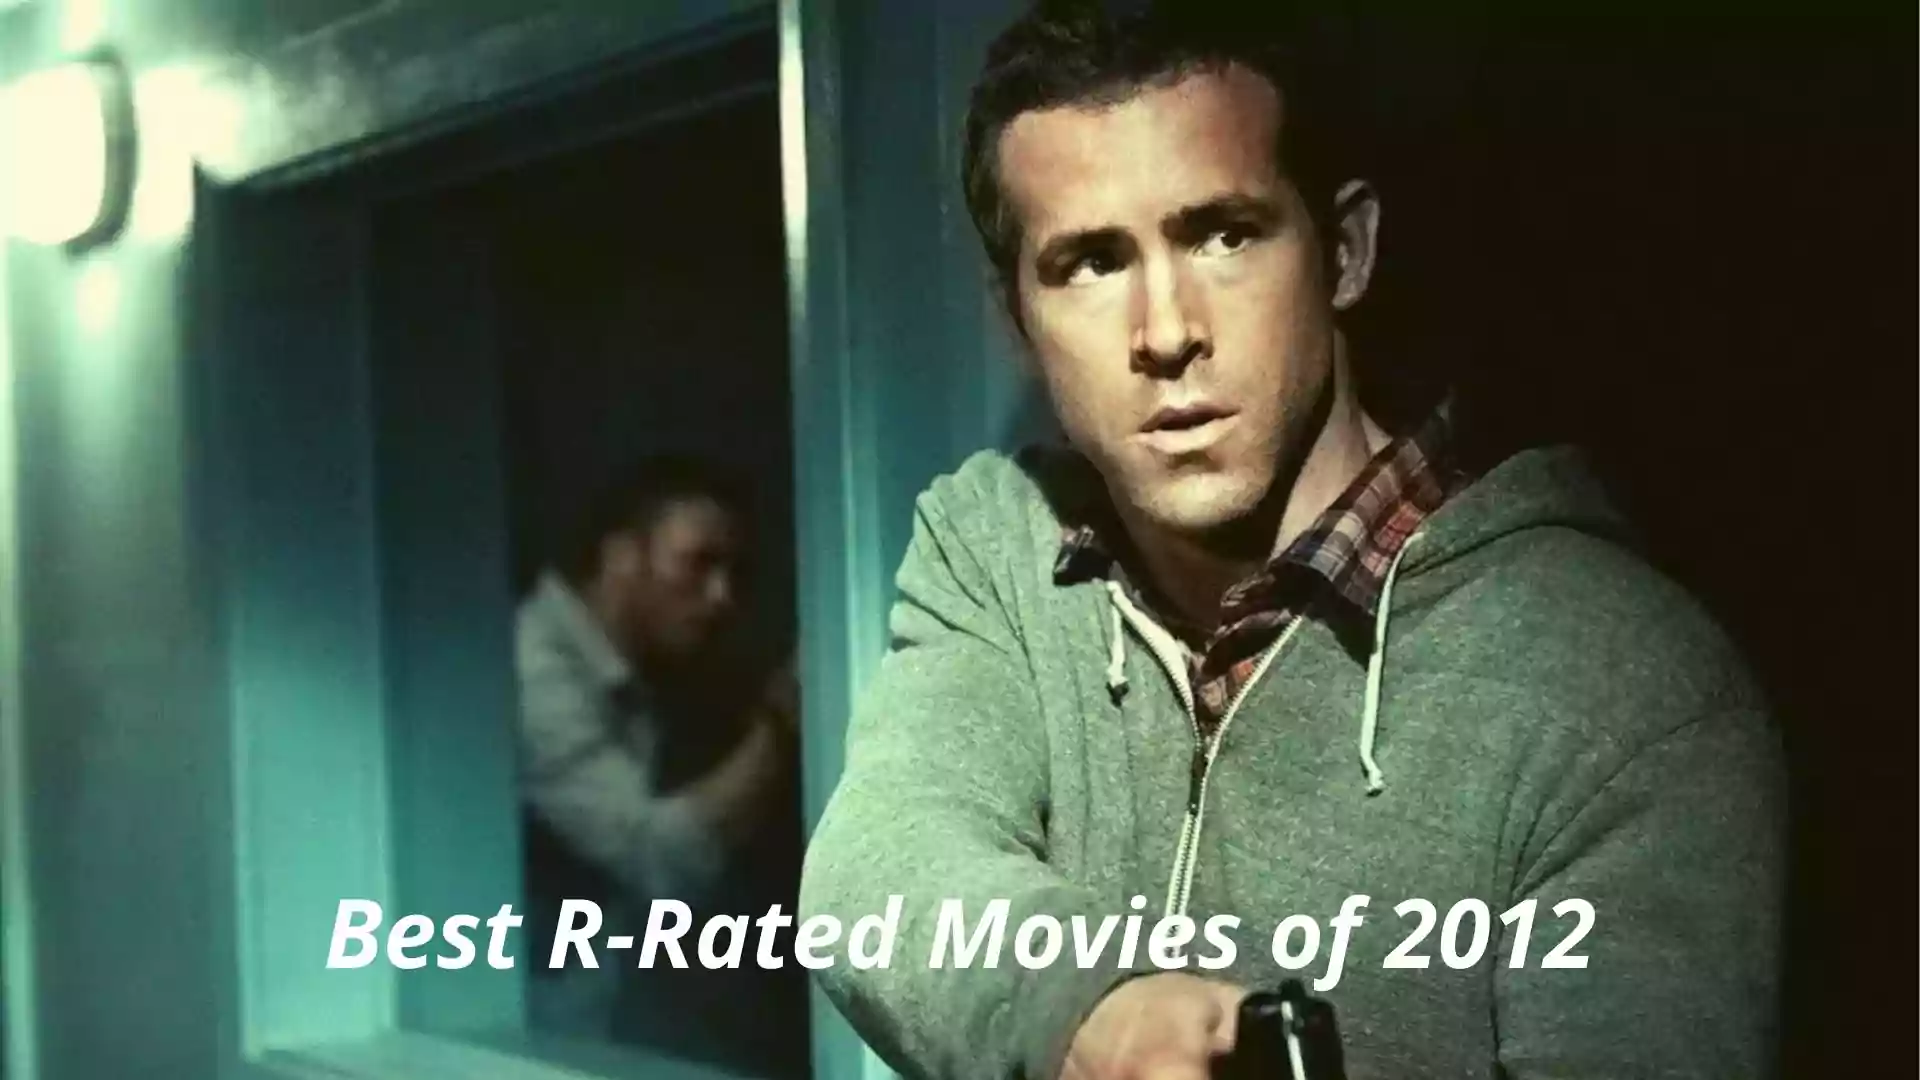 Best R-Rated Movies of 2012